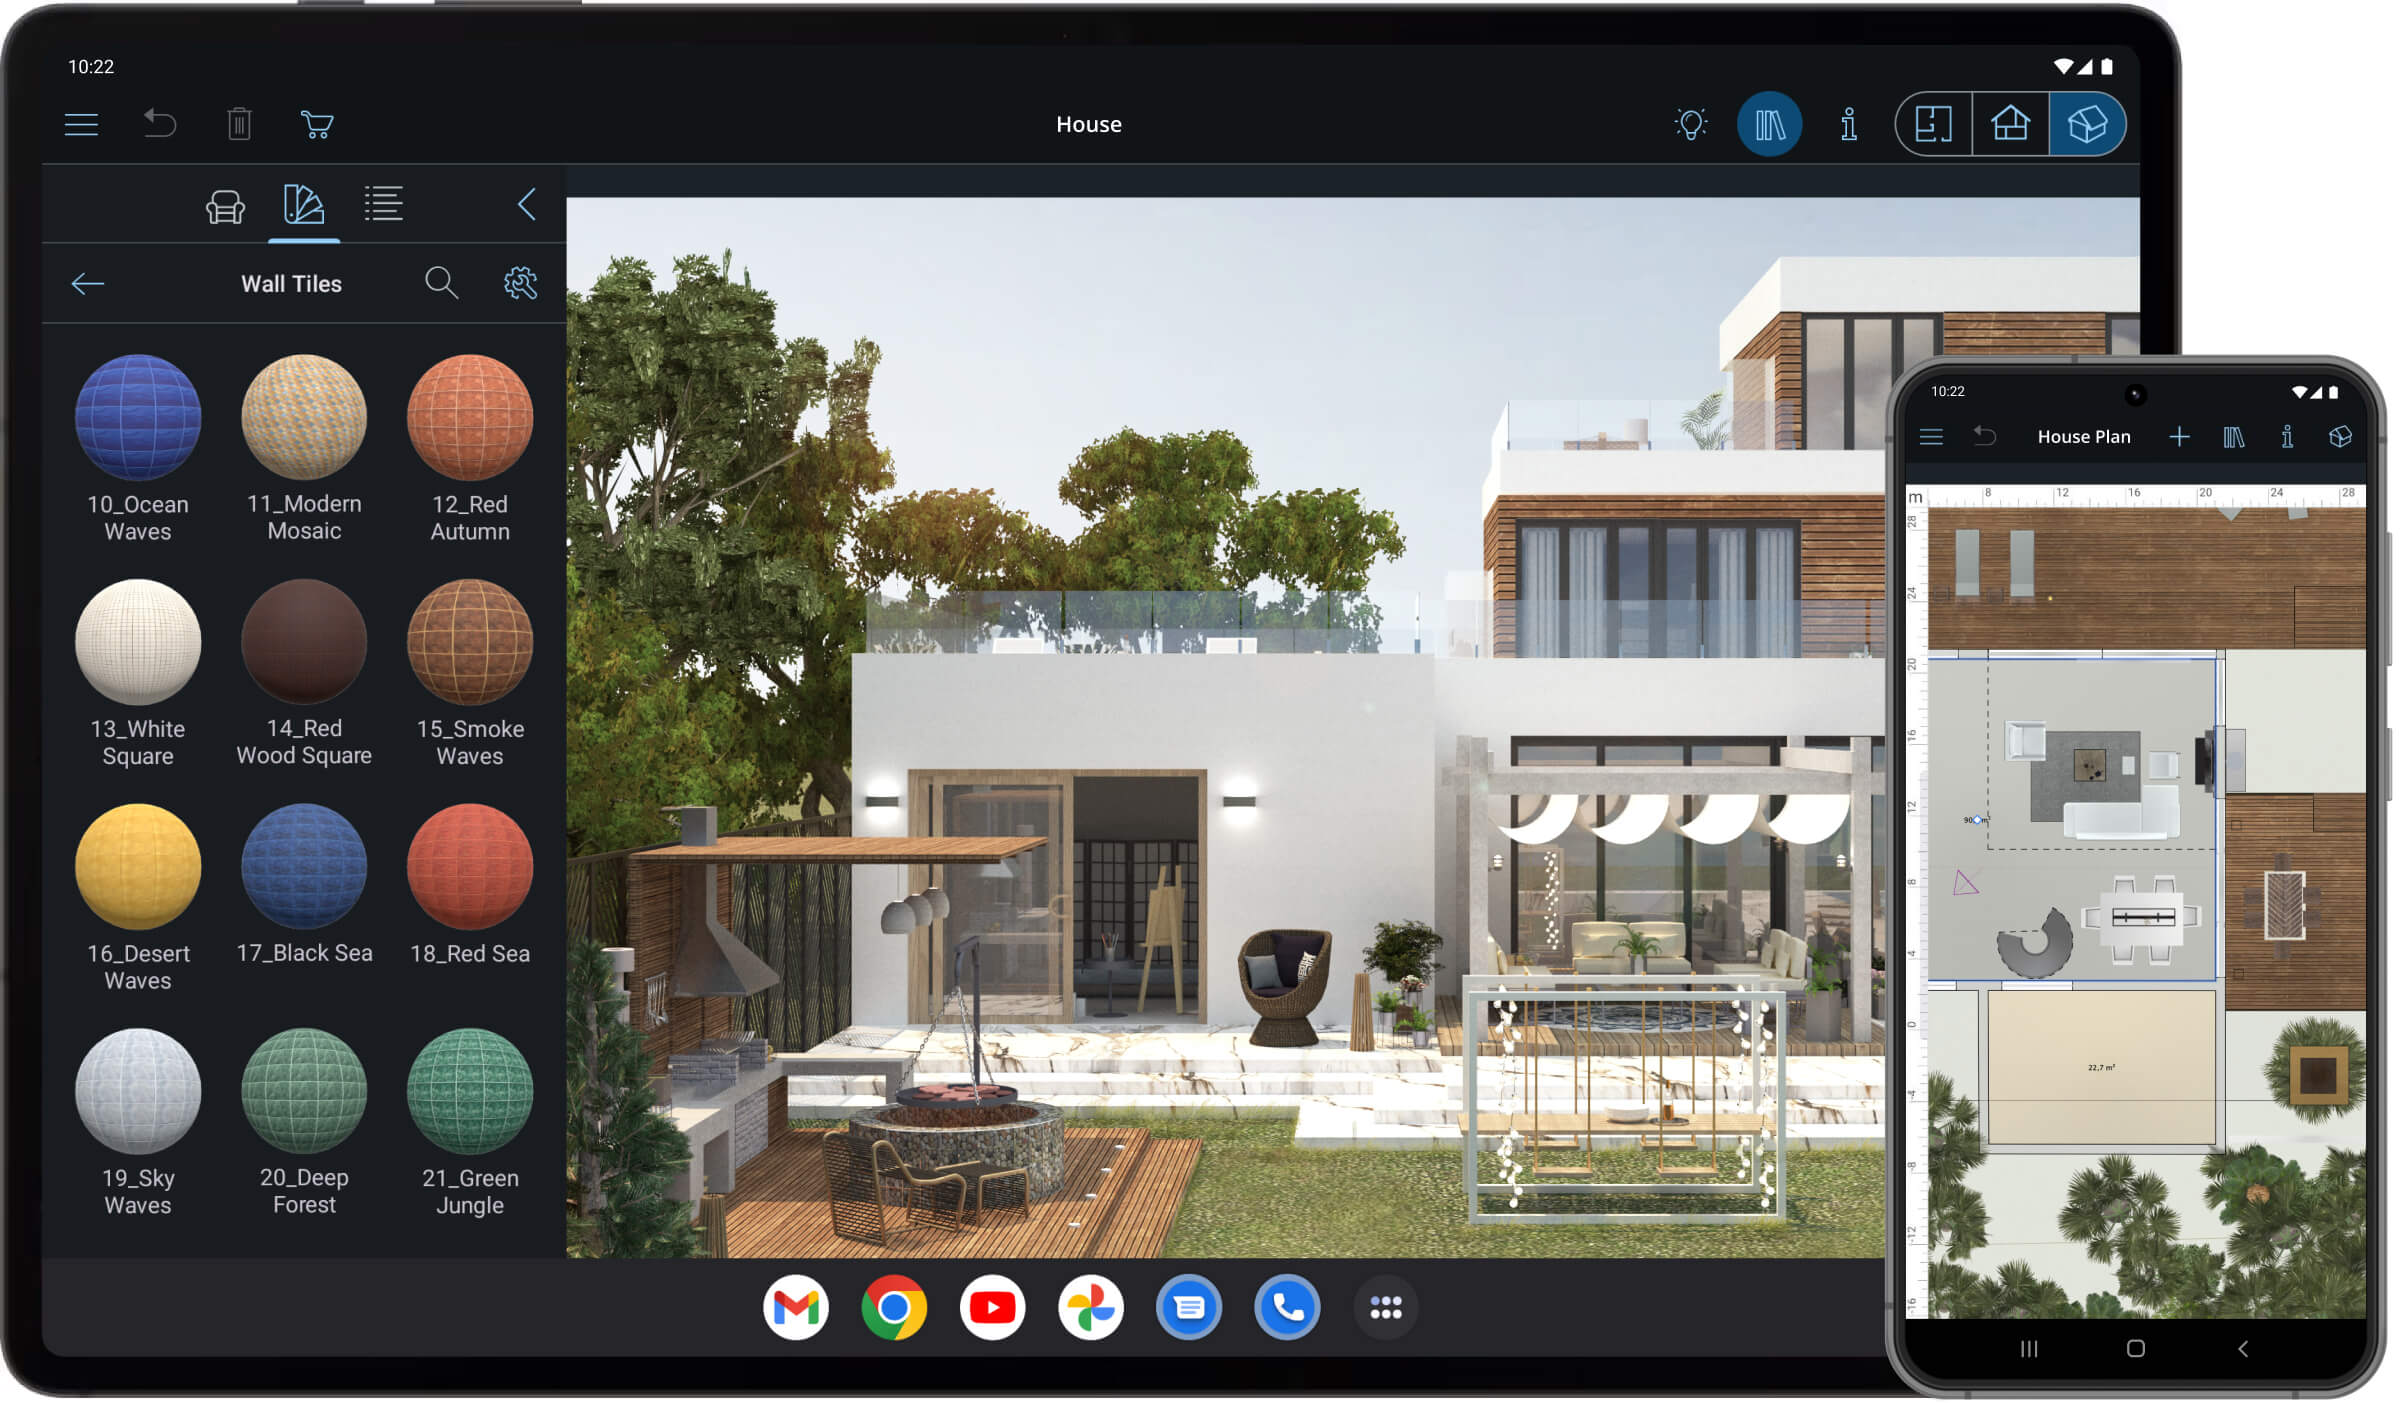 The Live Home 3D app is running on Android devices.